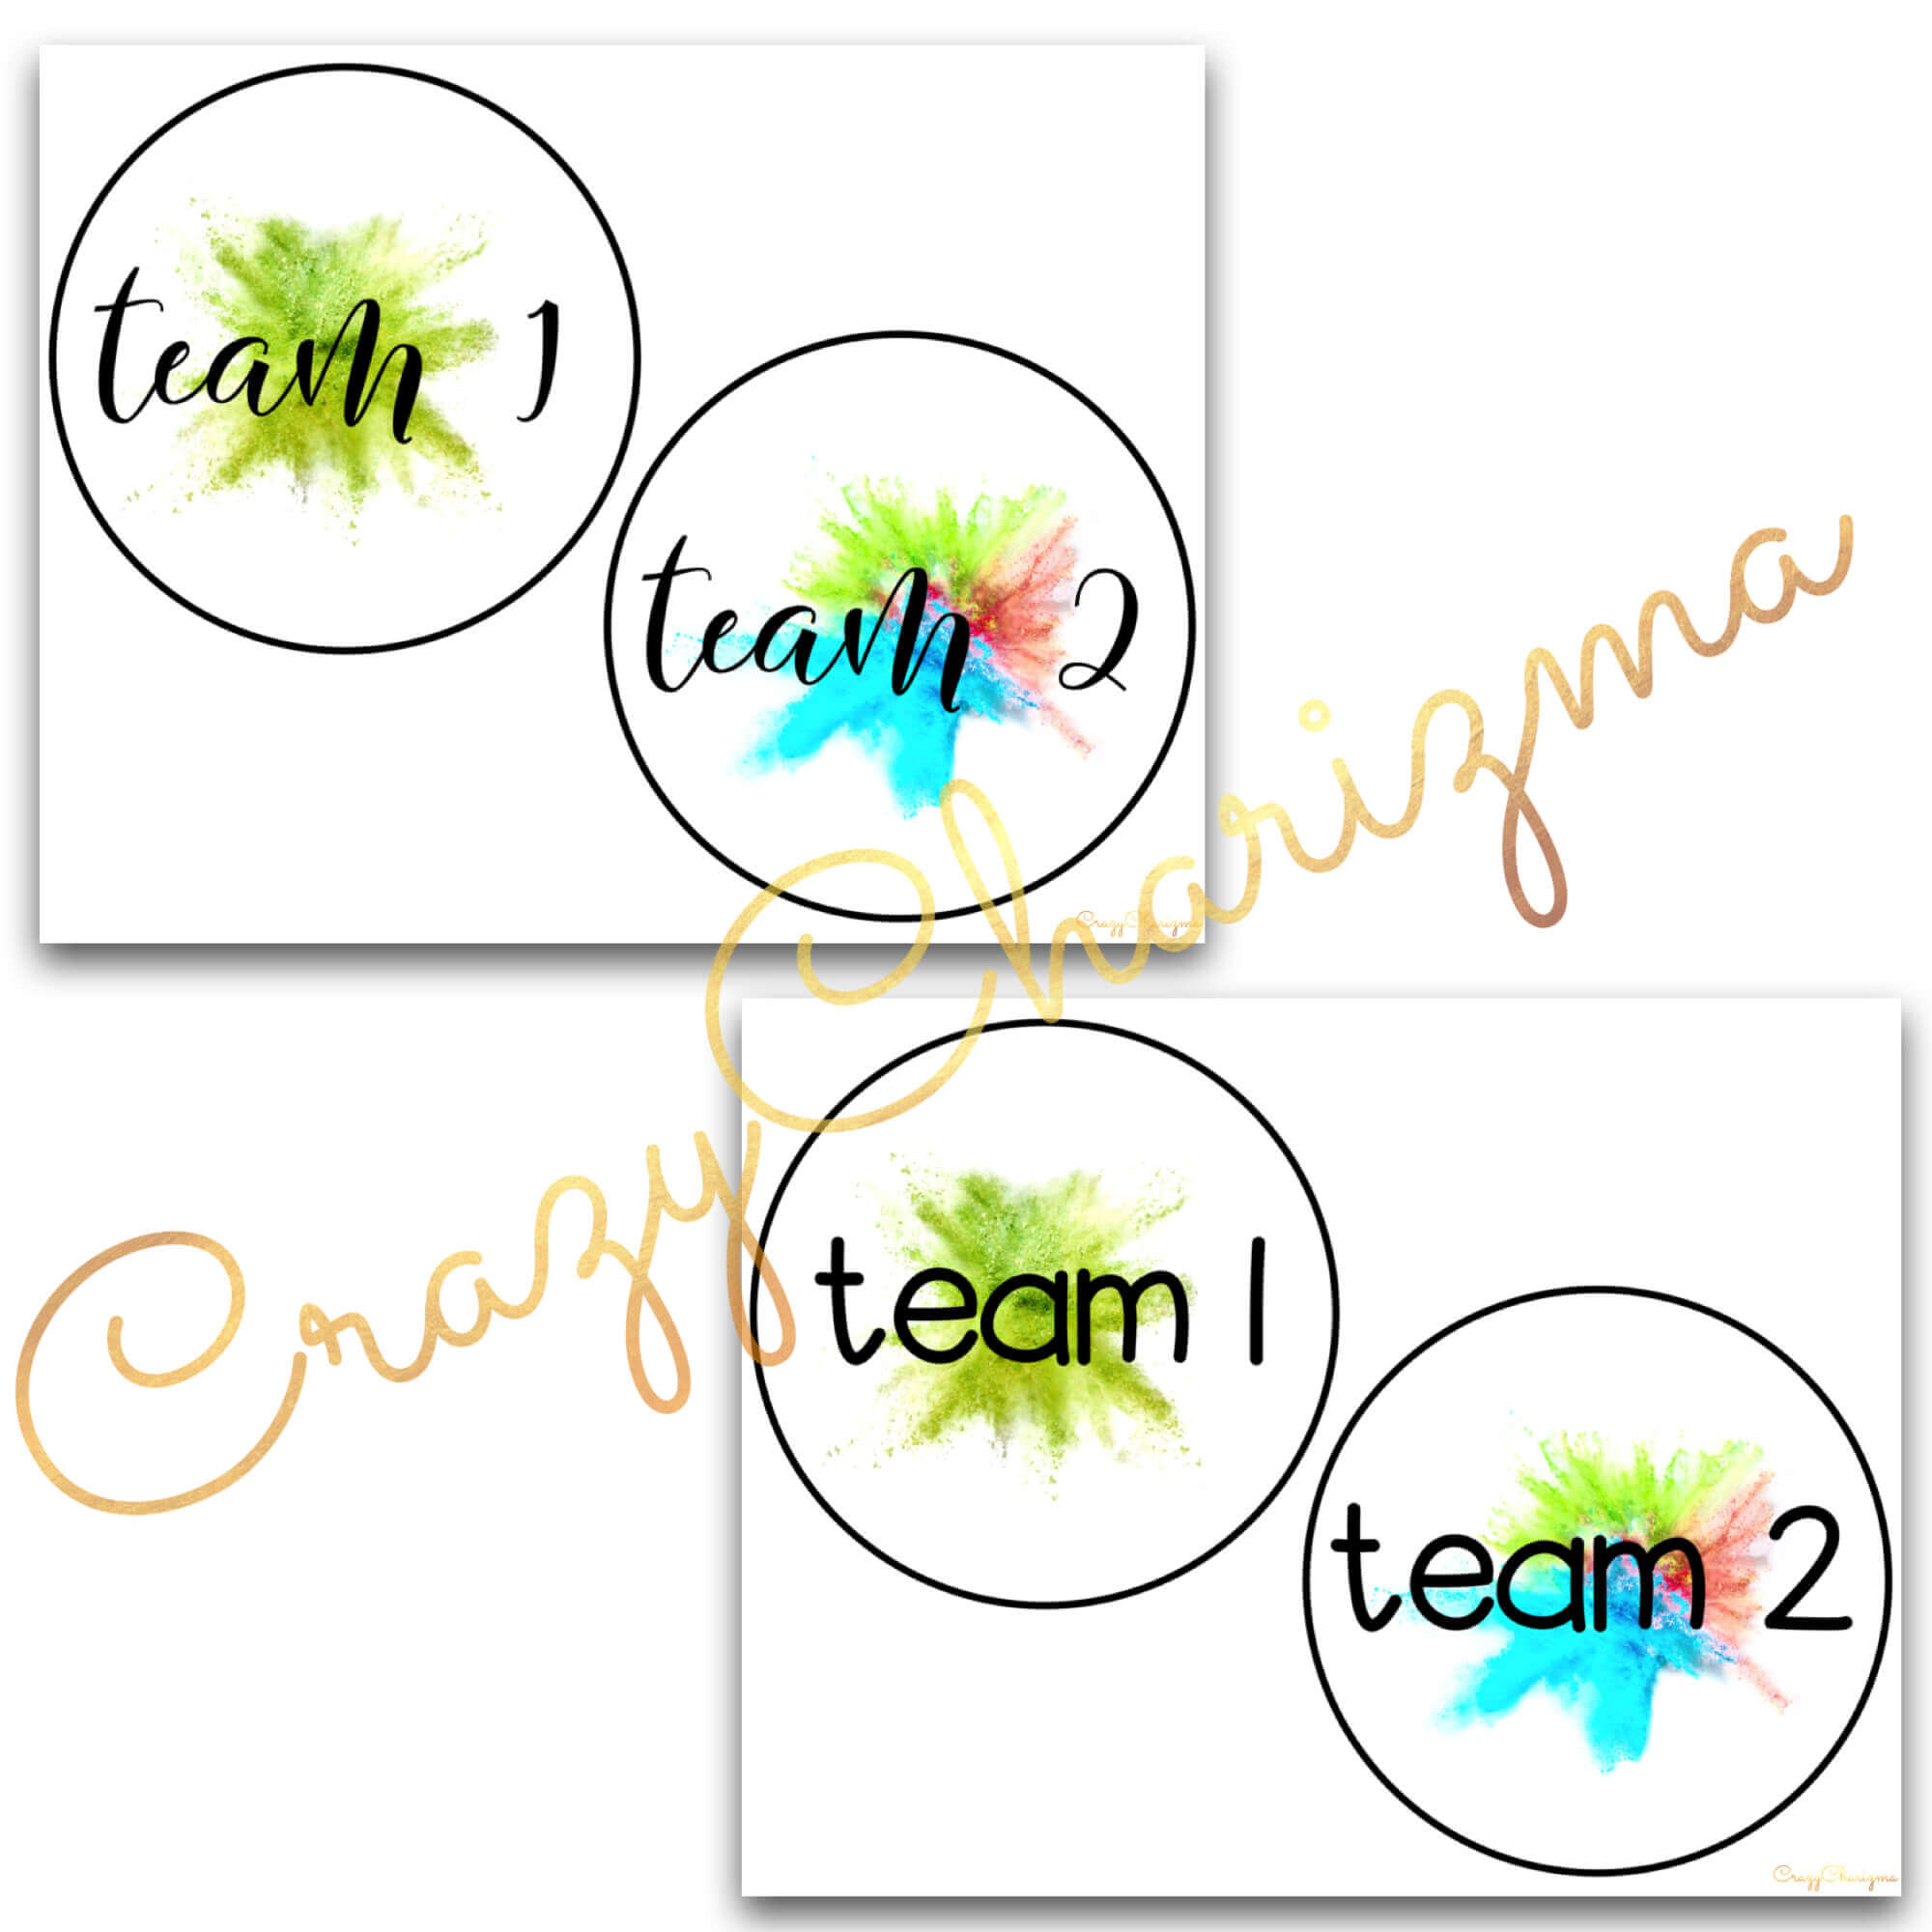 Decorate your classroom this year with this stylish SPLASH decor set. There are over 300+ pages of printables. Find inside classroom jobs labels, name tags, alphabet posters, numbers posters, centers signs, table signs, hall passes, schedule, calendar elements and various editable templates to make your own pieces.